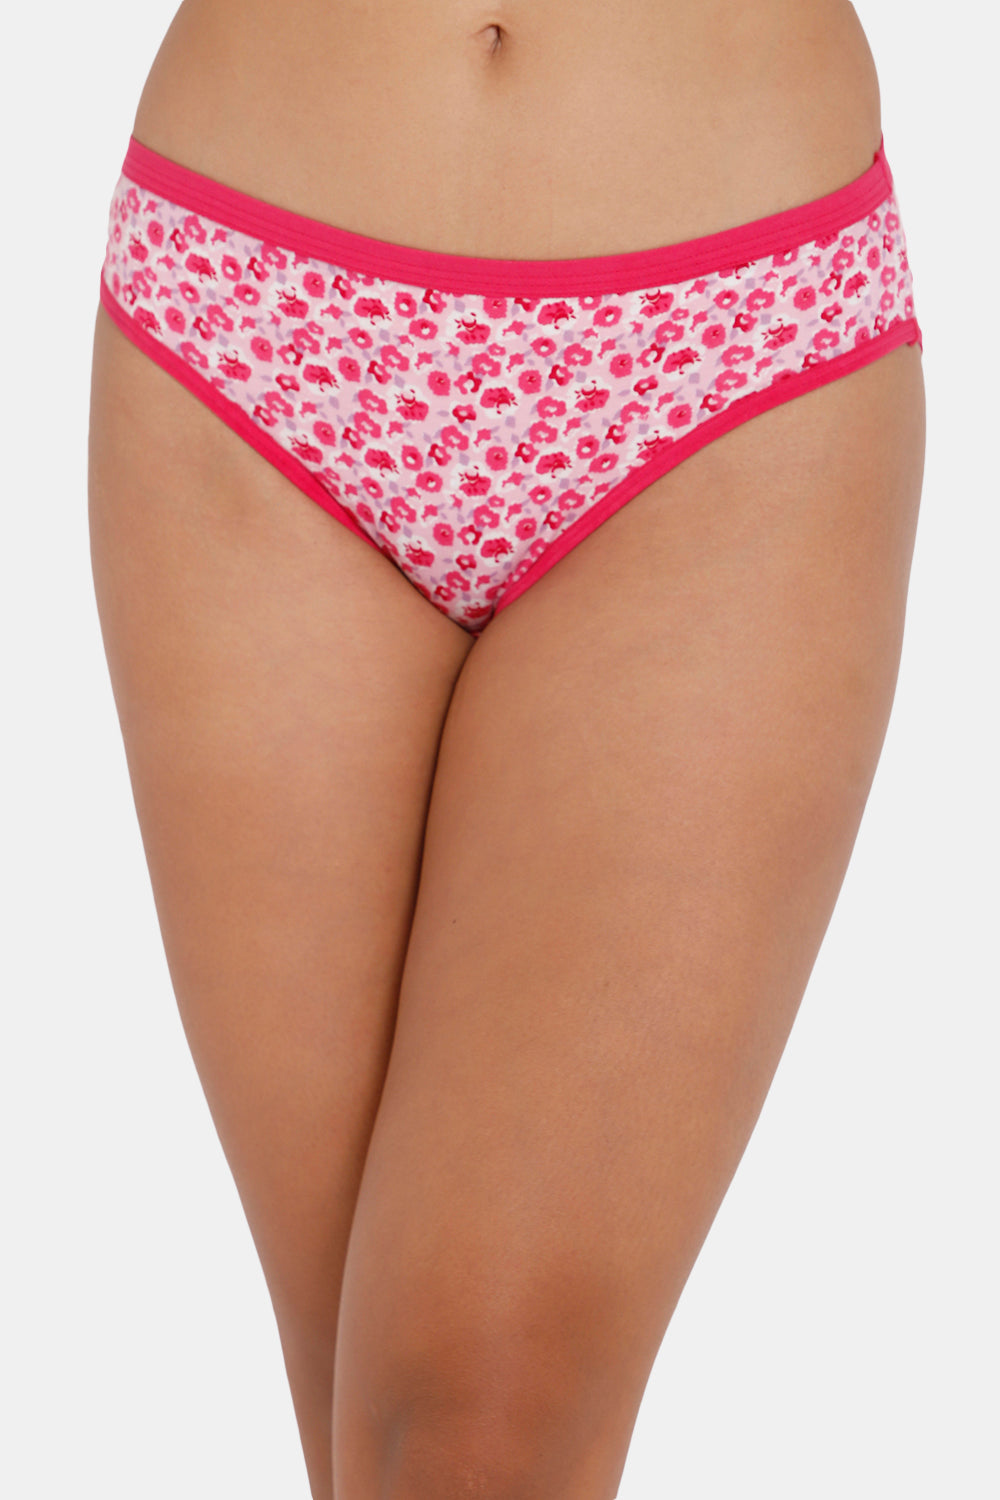 Panties Cotton Women Inner Wear, Model Name/Number: Ch 201, 2 at Rs 178 in  Dombivli